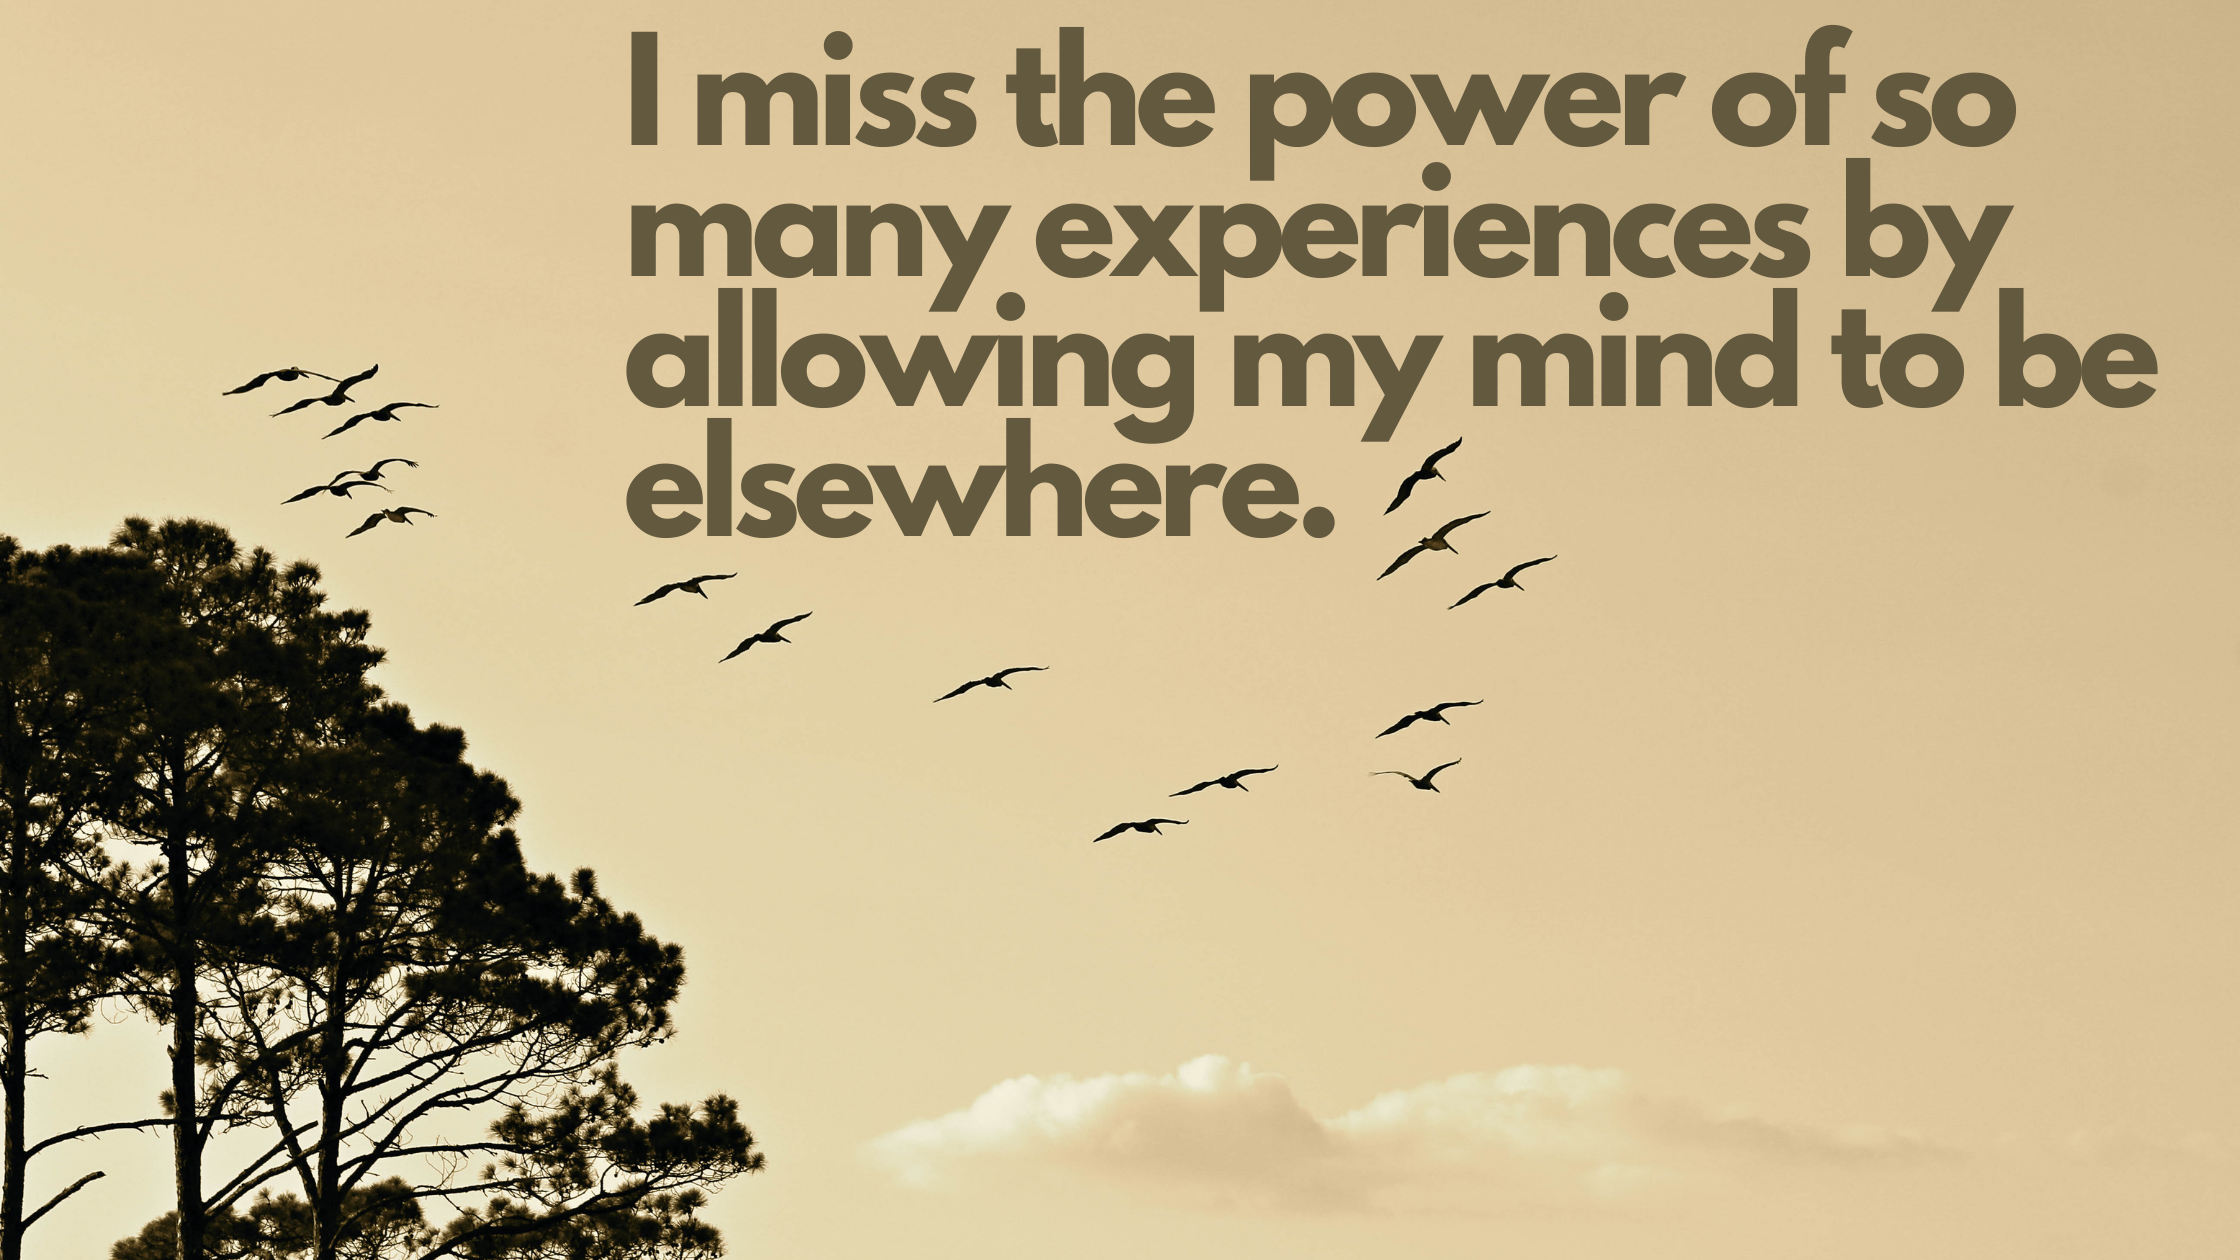 I miss the power of so many experiences by allowing my mind to be elsewhere.